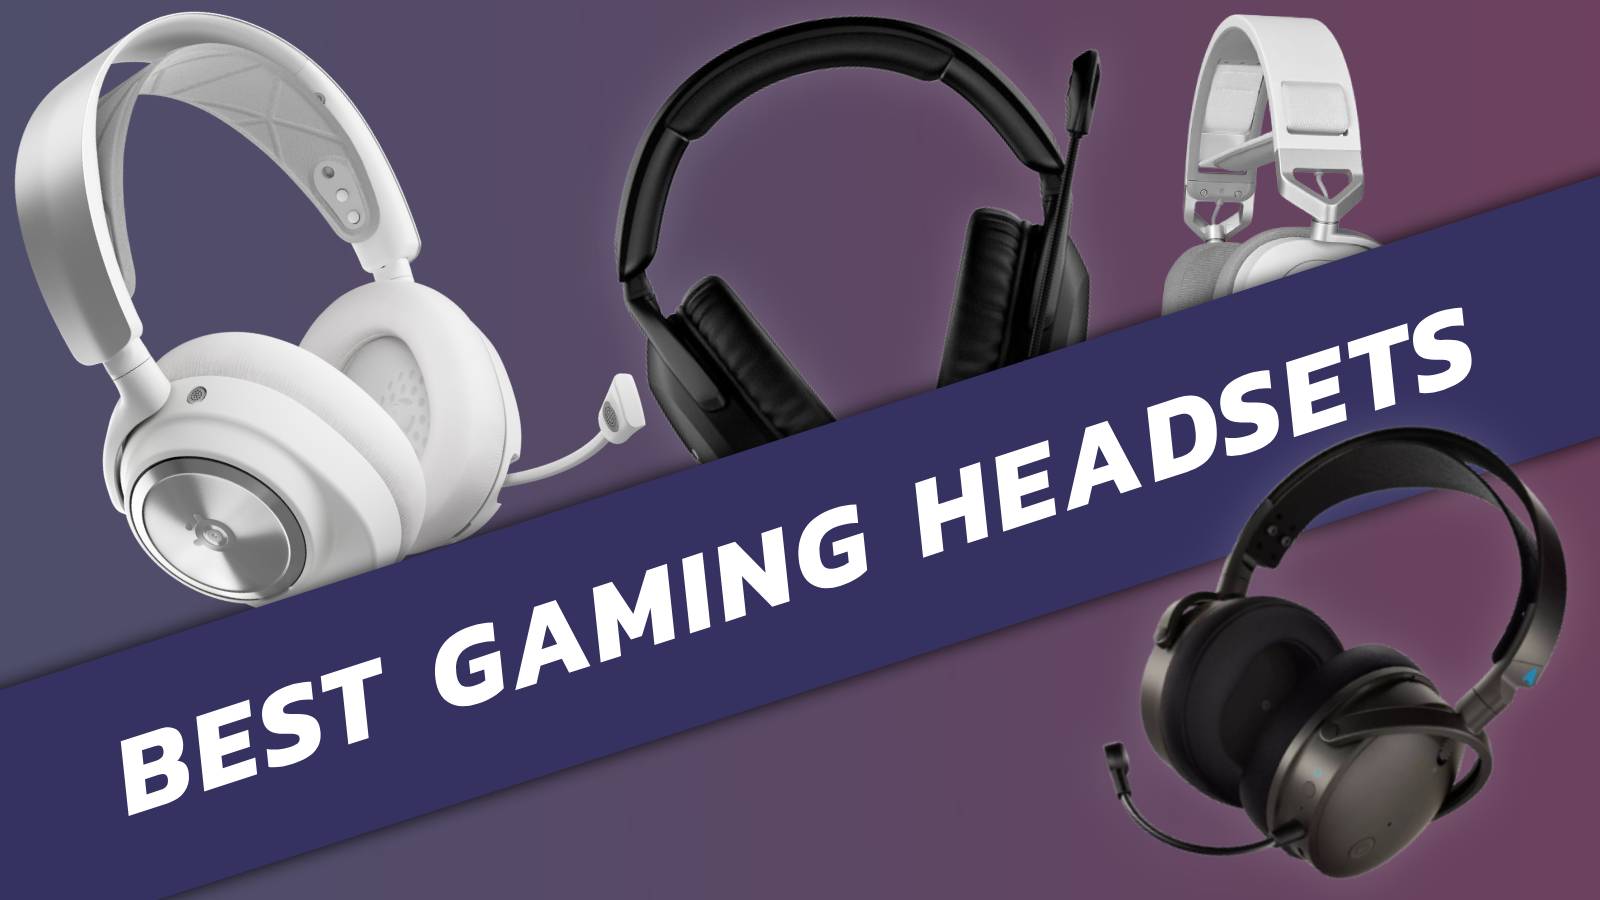 Image of four gaming headsets, on a dark purple background with a purple banner.